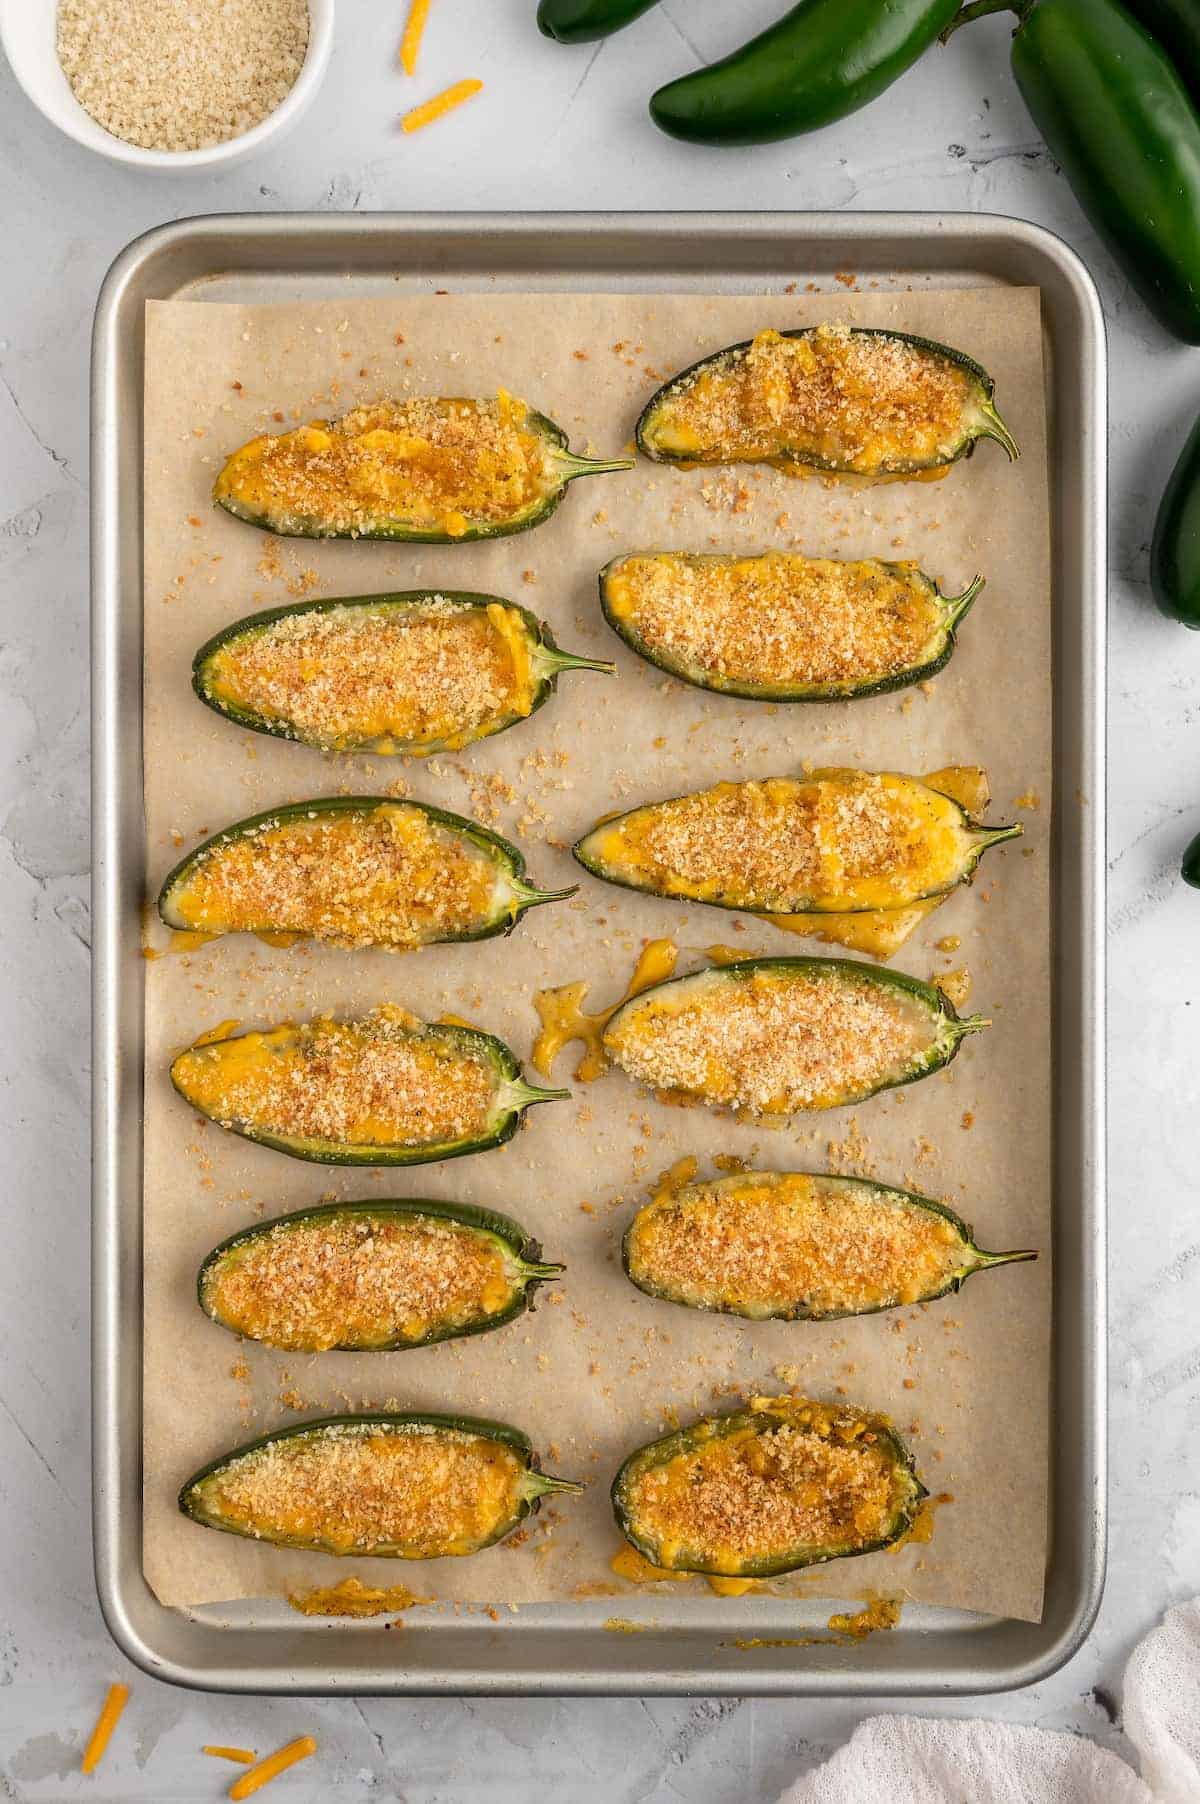 Jalapeno poppers on a baking sheet, after coming out of the oven. The peppers are browned and bubbly.